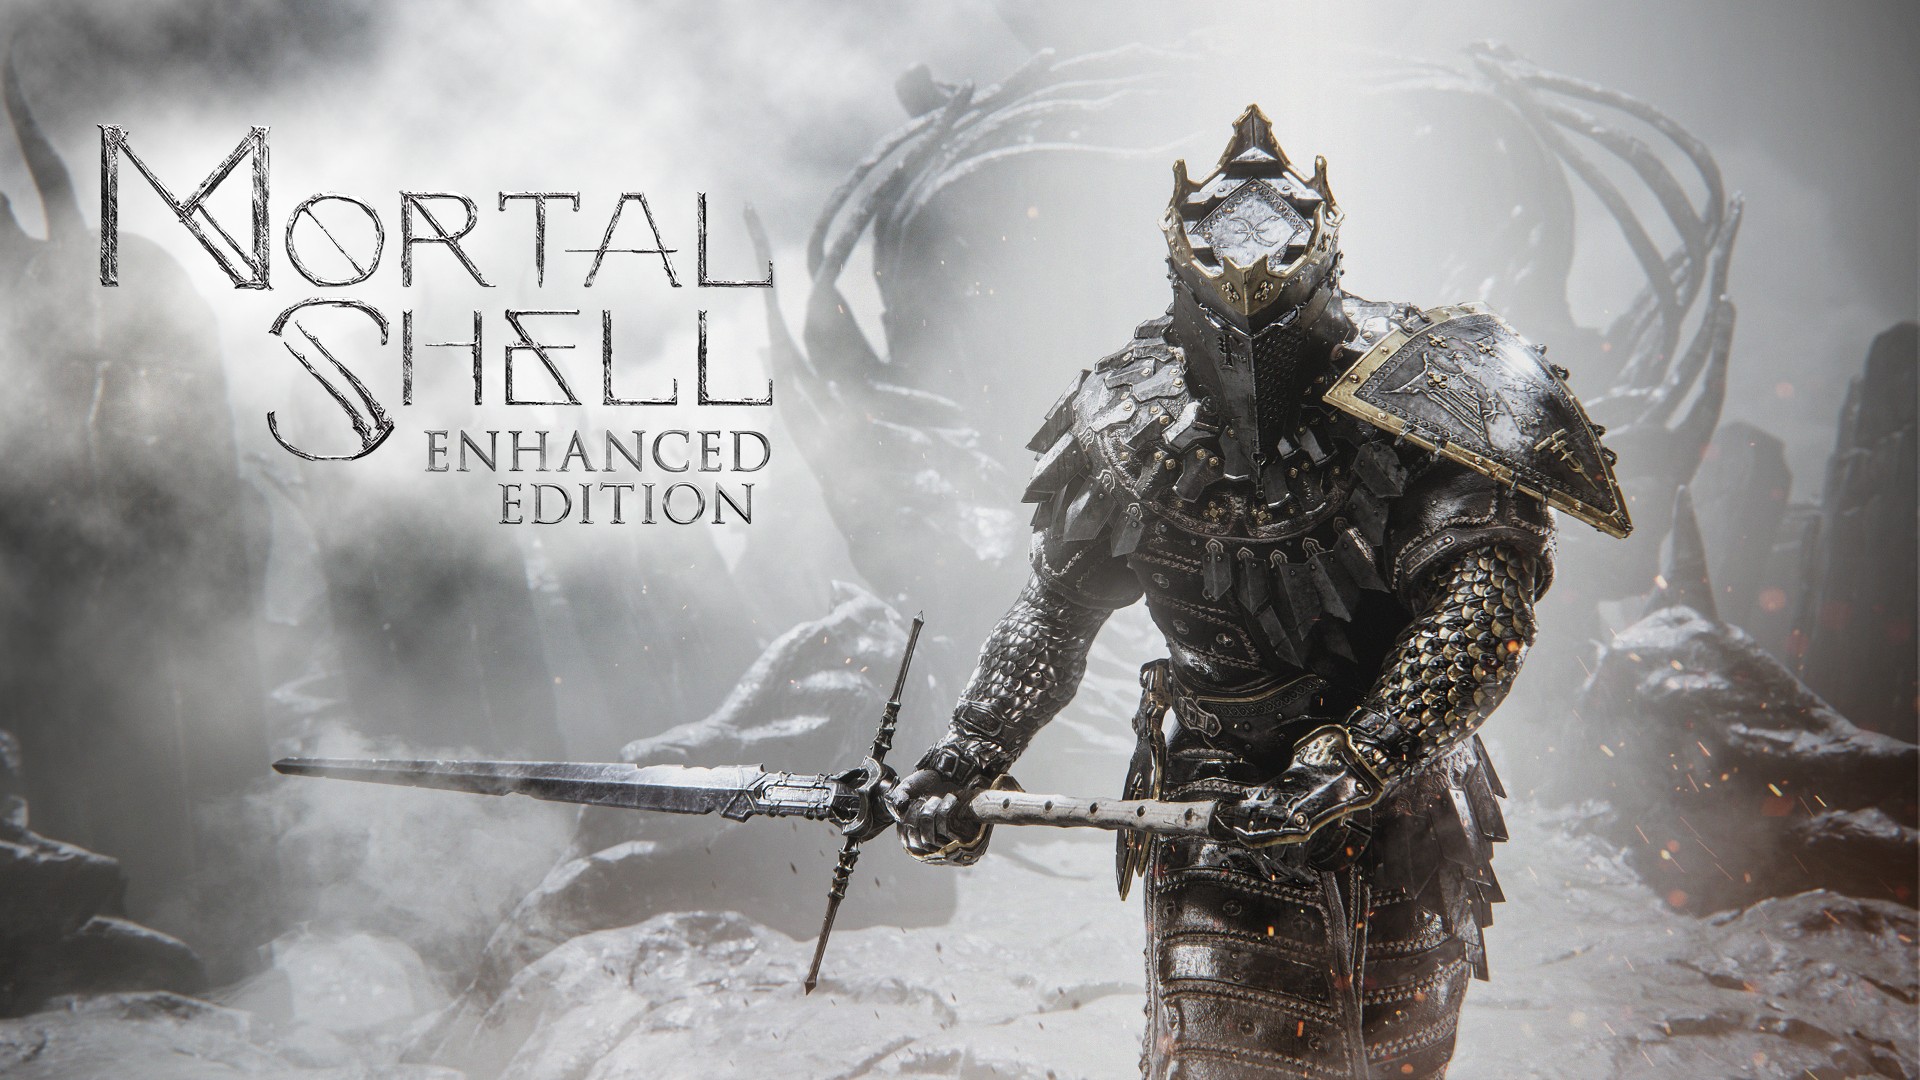 Mortal Shell: Enhanced Edition Revealed For Playstation 5 & Xbox Series X|S